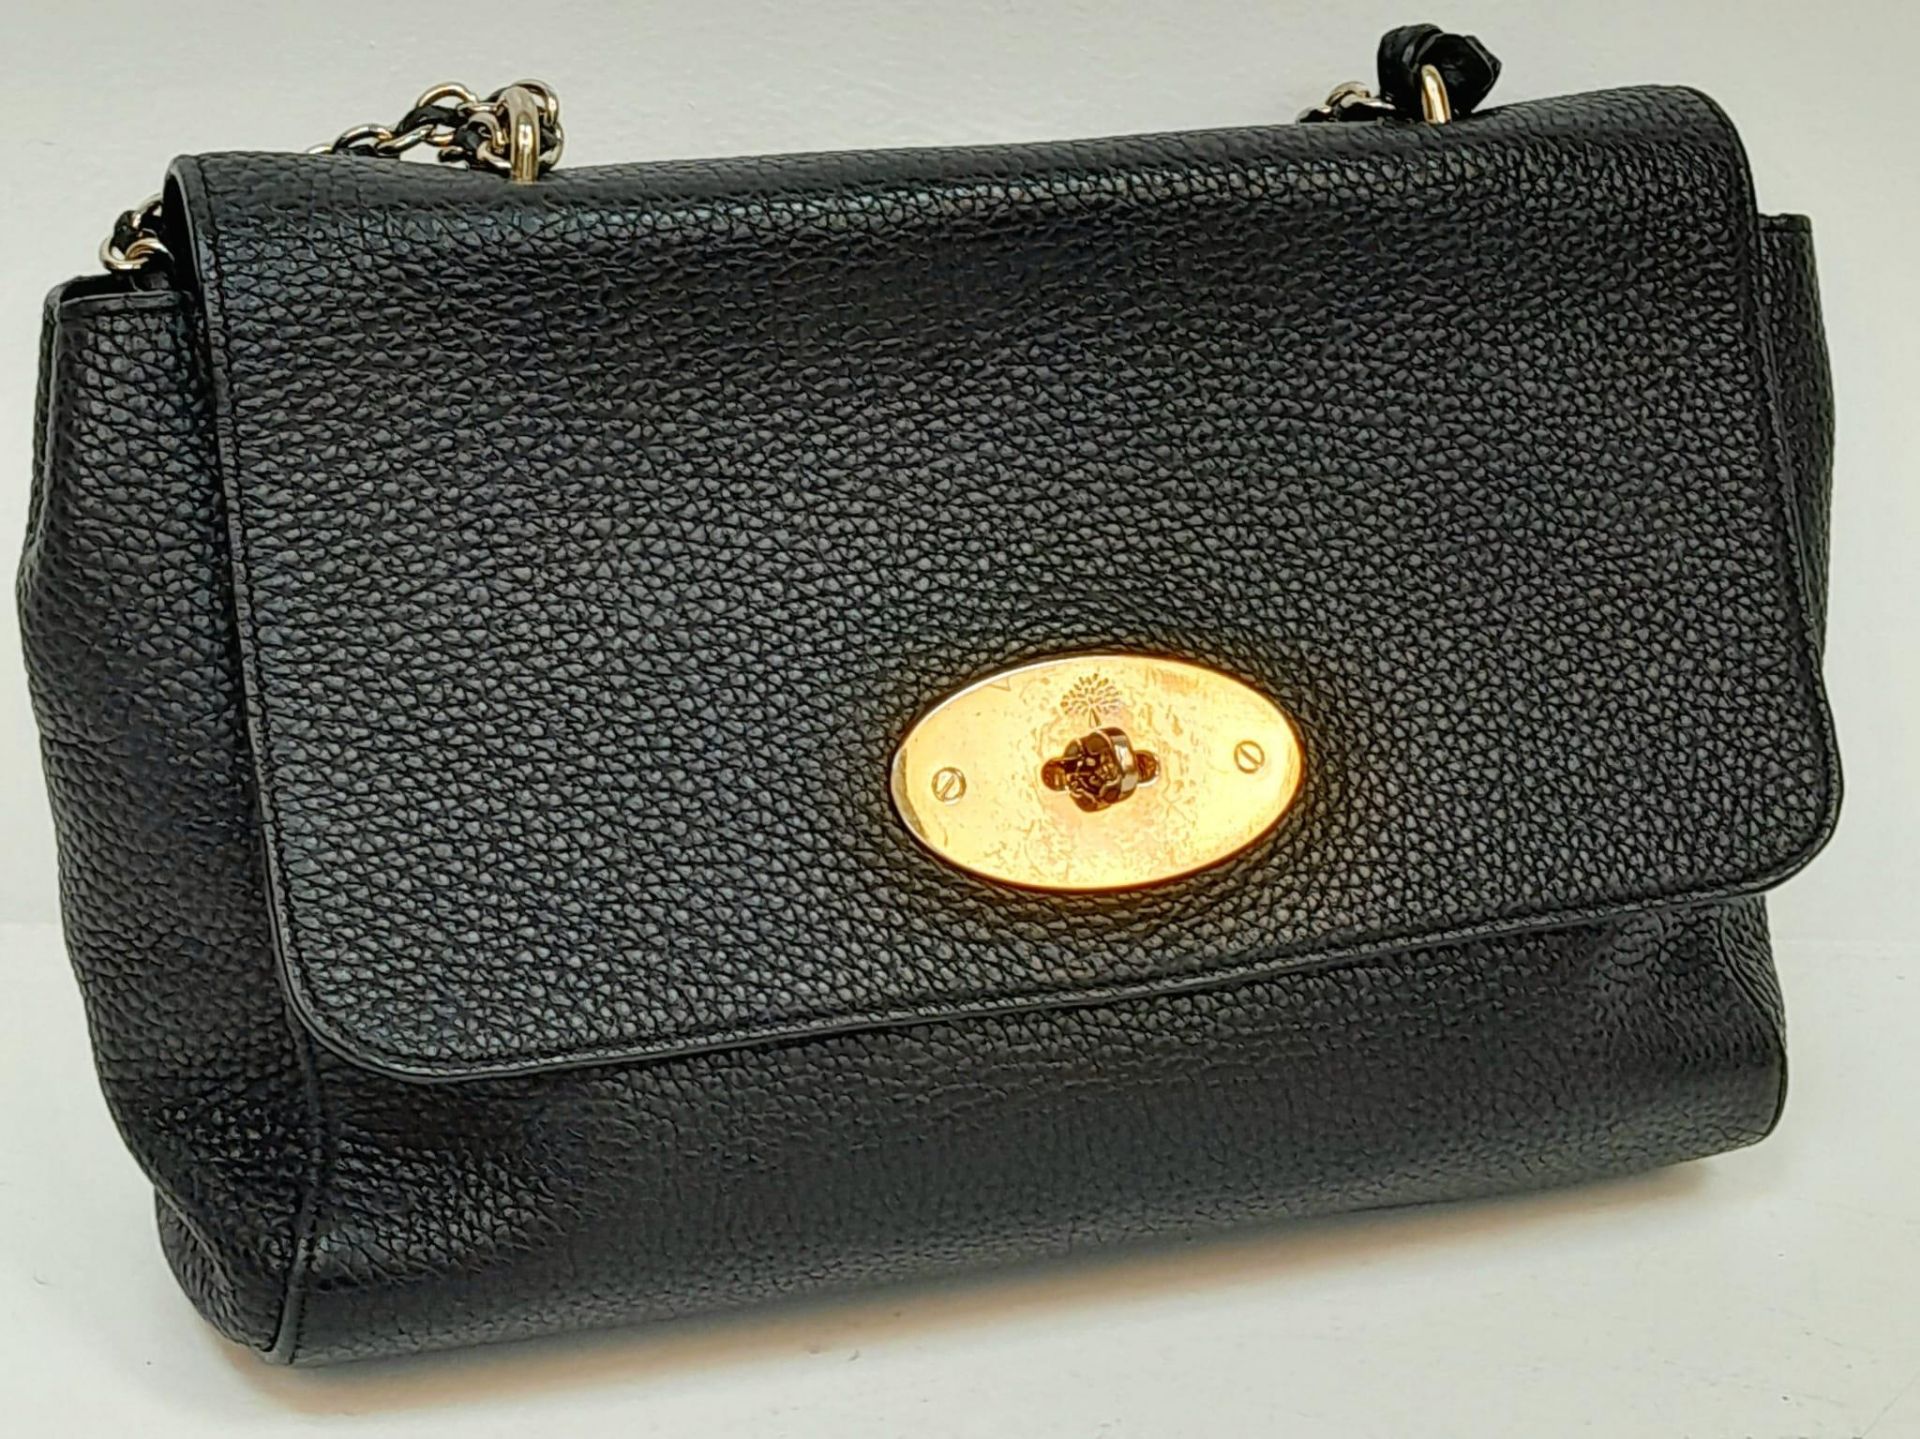 A Mulberry Black 'Lily' Bag. Leather exterior with gold-toned hardware, chain and leather strap, - Image 5 of 12